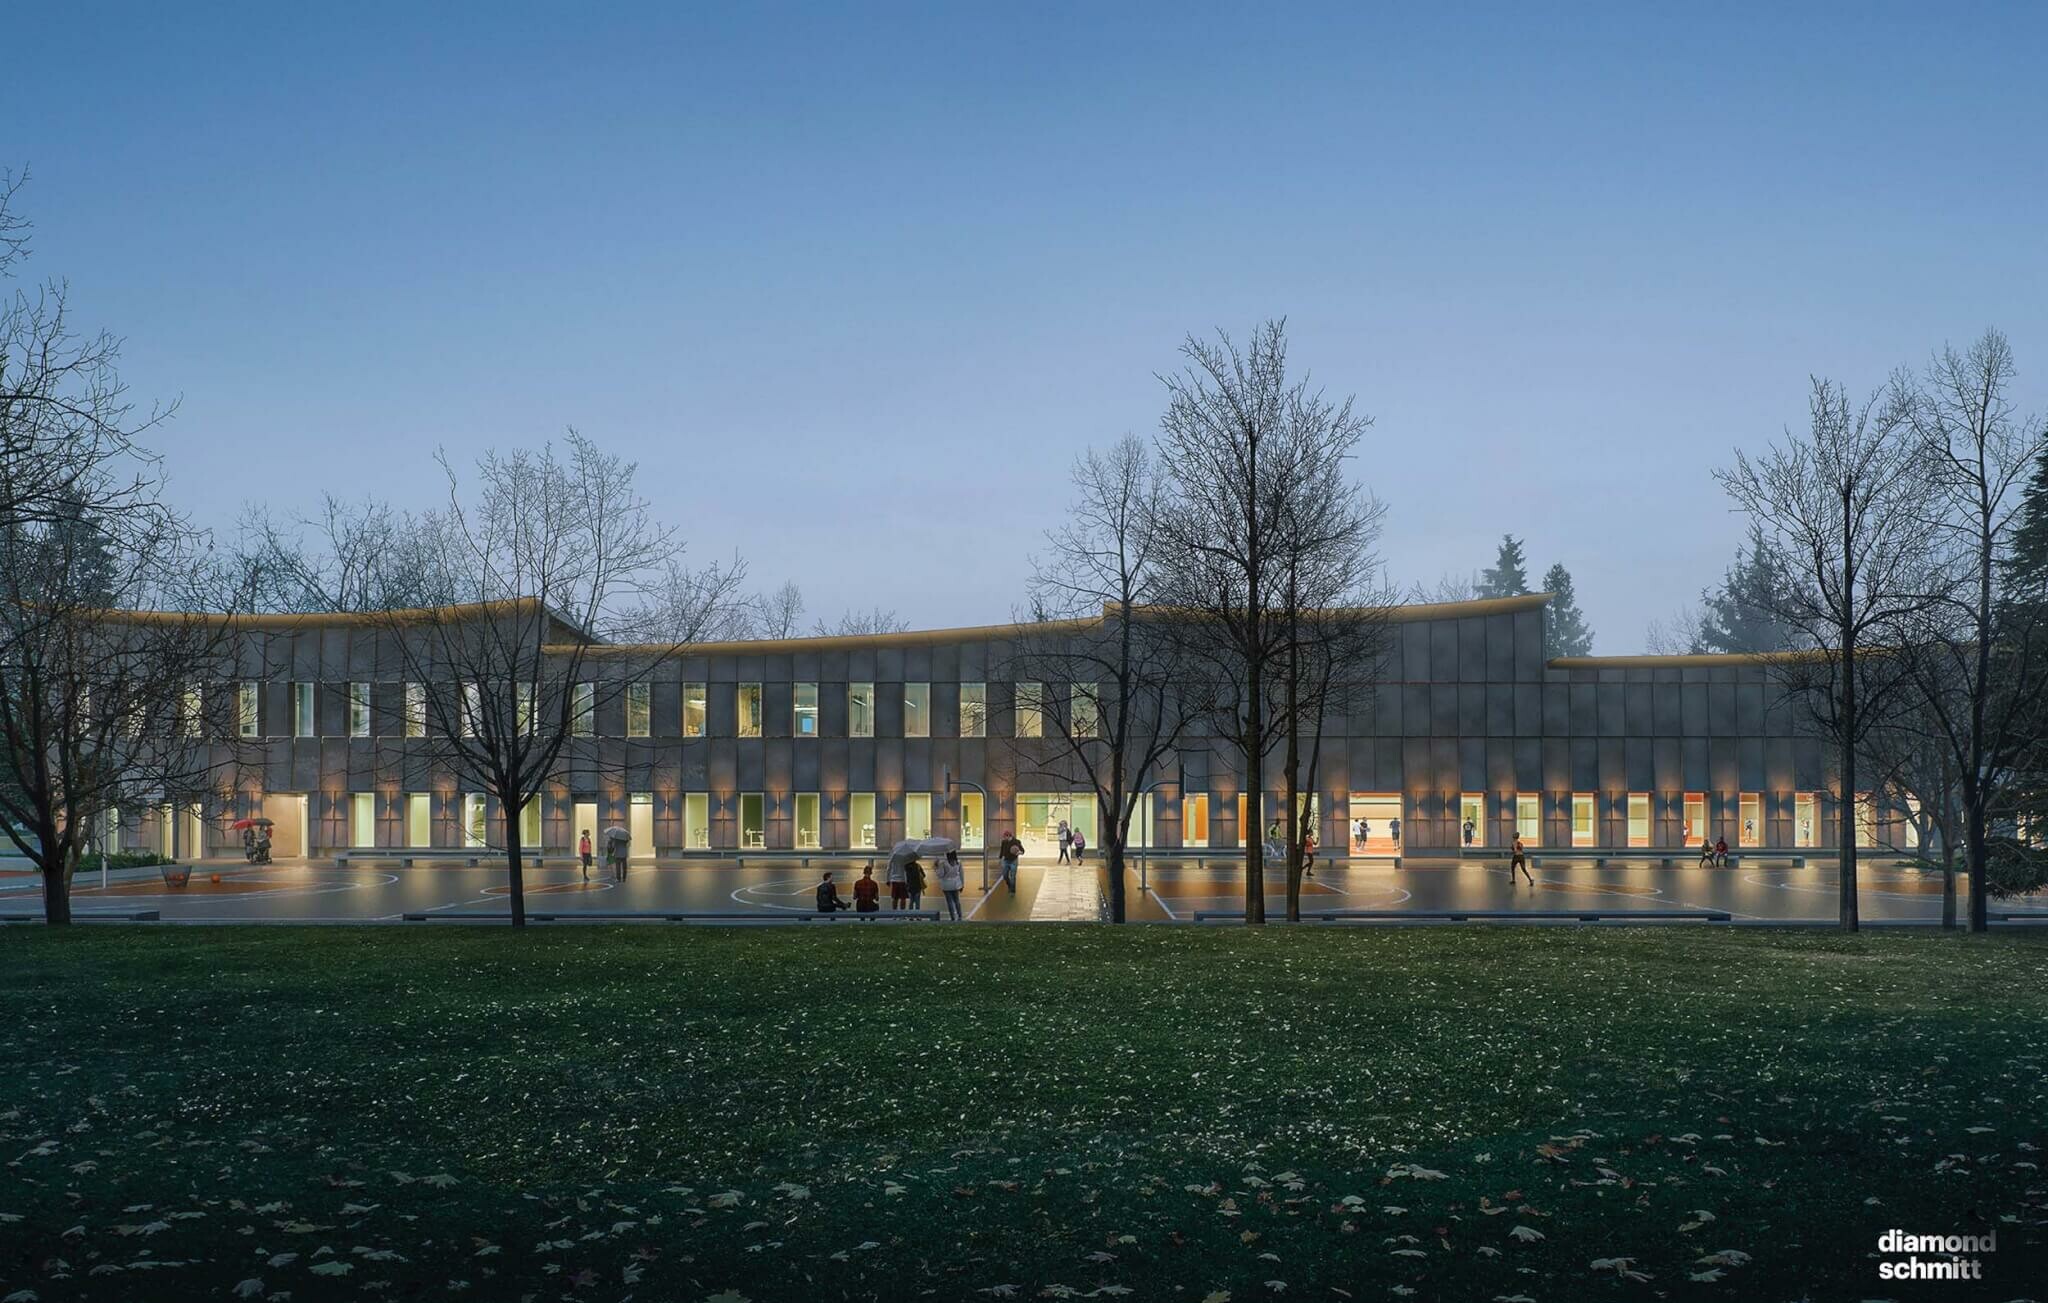 Marpole Community Center will be presented at Facades+ Vancouver